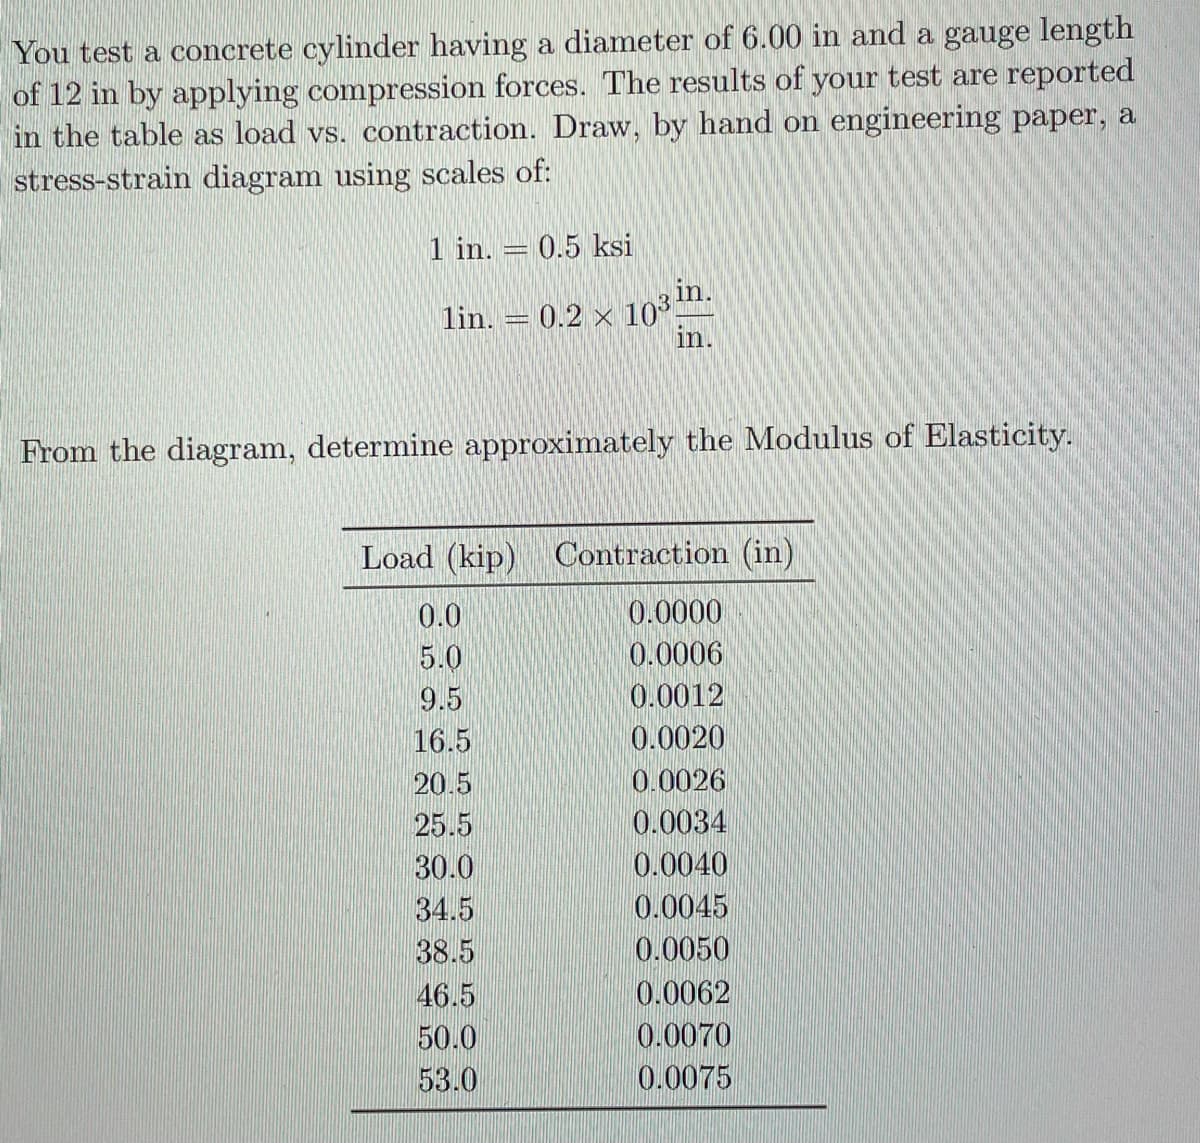 lin. = 0.2 x 103 in.
You test a concrete cylinder having a diameter of 6.00 in and a gauge length
of 12 in by applying compression forces. The results of your test are reported
in the table as load vs. contraction. Draw, by hand on engineering paper, a
stress-strain diagram using scales of:
1 in. = 0.5 ksi
in.
From the diagram, determine approximately the Modulus of Elasticity.
Load (kip) Contraction (in)
0.0
0.0000
5.0
0.0006
9.5
0.0012
16.5
0.0020
20.5
0.0026
25.5
0.0034
30.0
0.0040
34.5
0.0045
38.5
0.0050
46.5
0.0062
50.0
0.0070
53.0
0.0075
